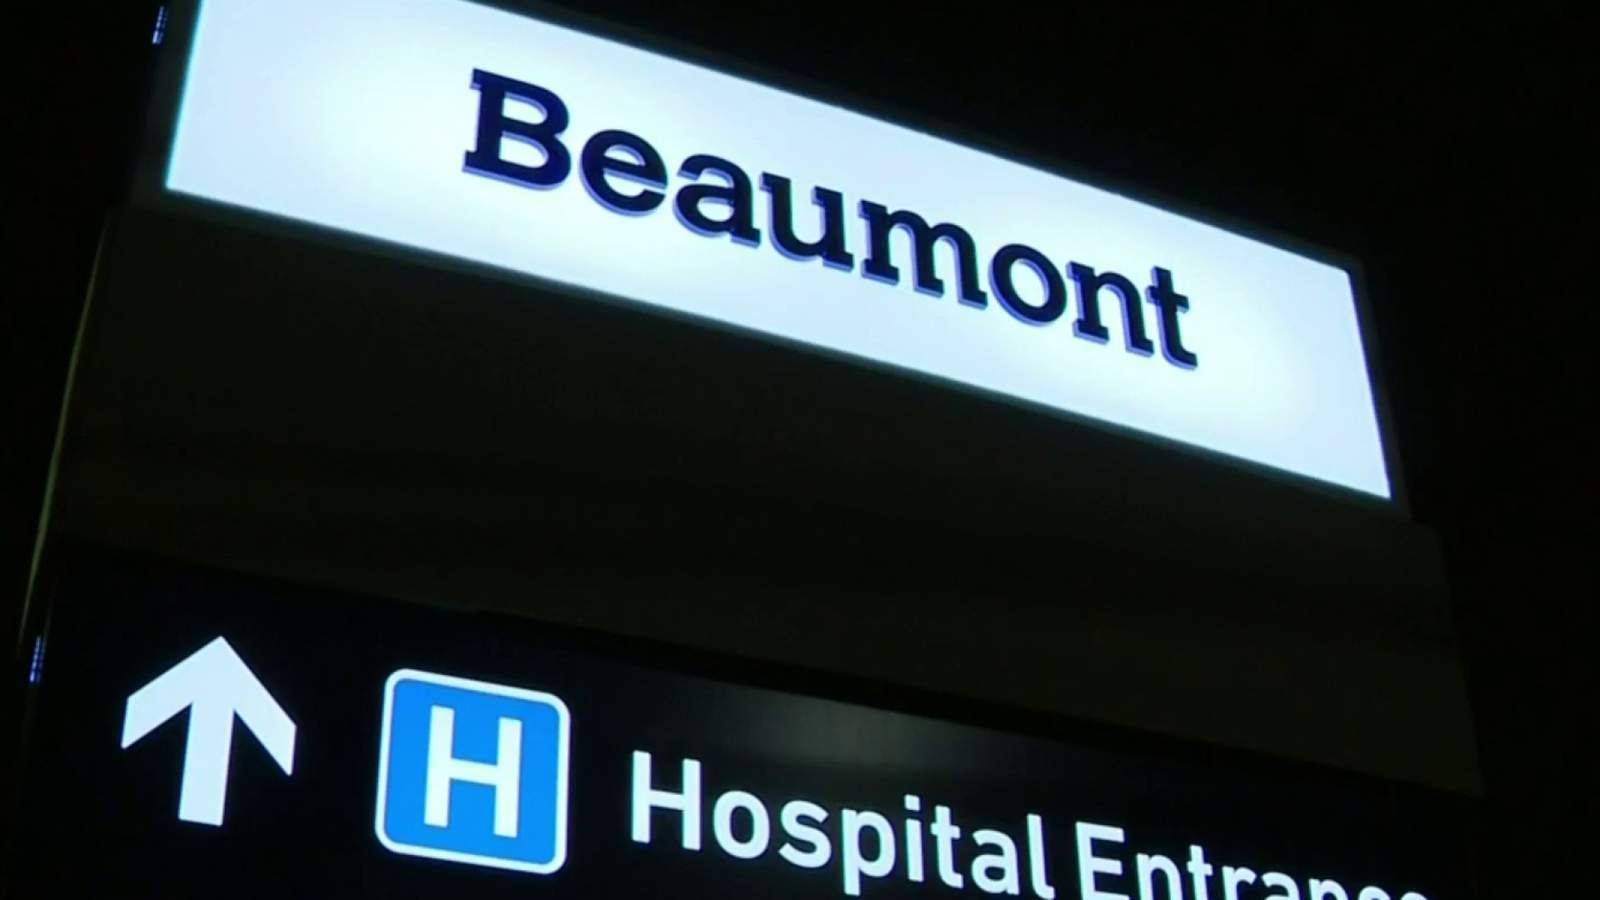 Beaumont Wayne Hospital expected to reopen soon for both COVID-19 and non-coronavirus cases